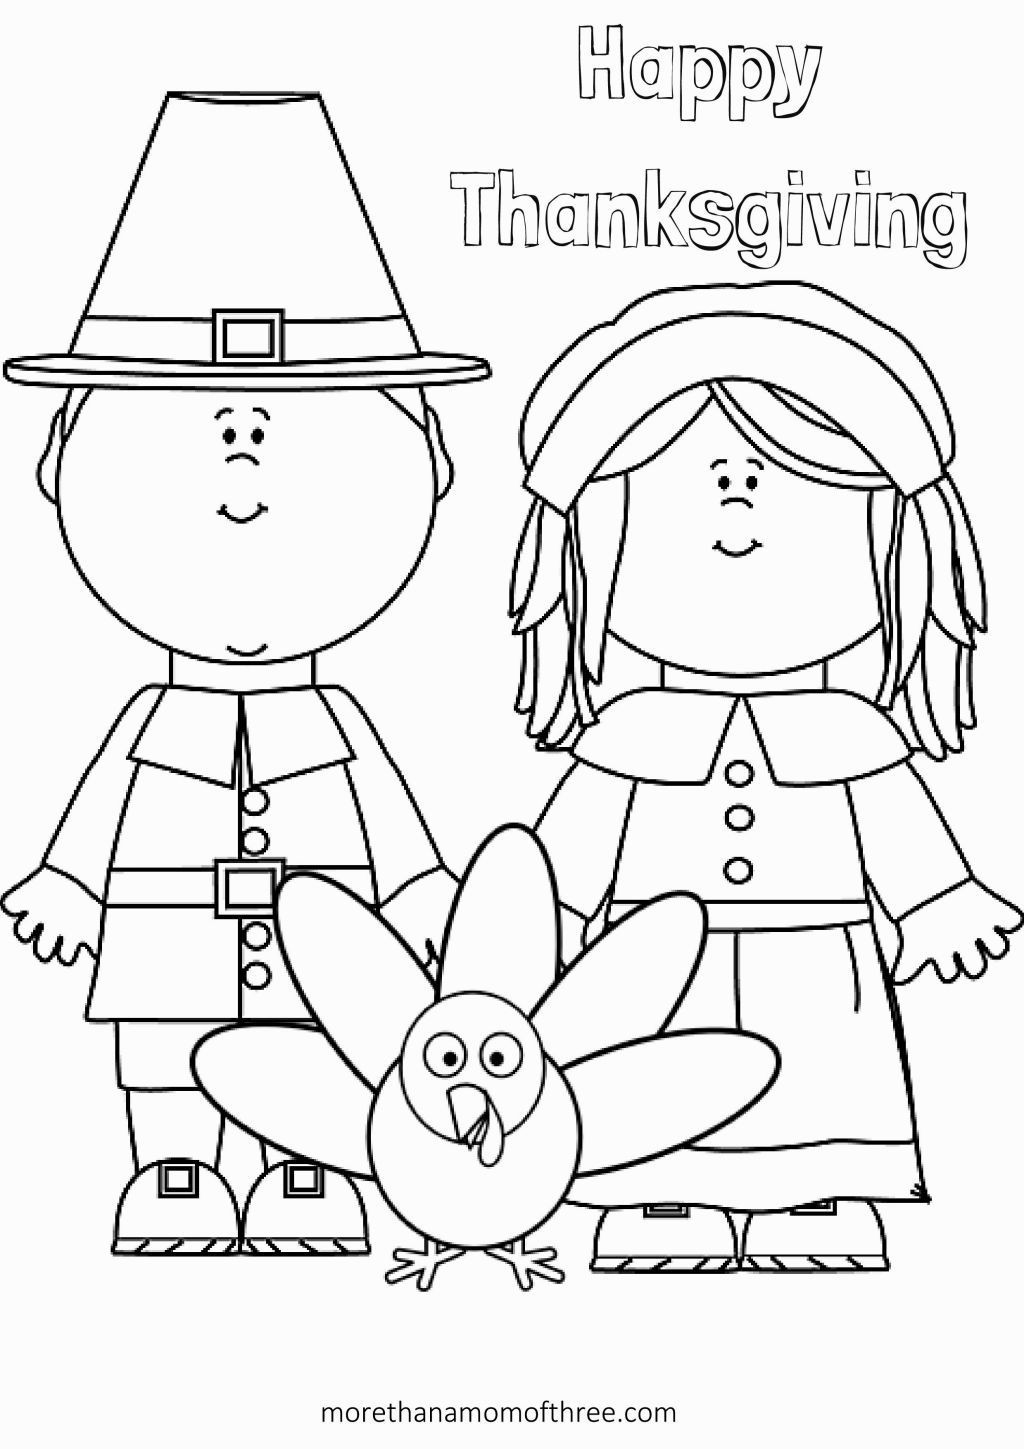 Thanksgiving Coloring Pages For Preschoolers
 Thanksgiving Preschool Coloring Pages AZ Coloring Pages